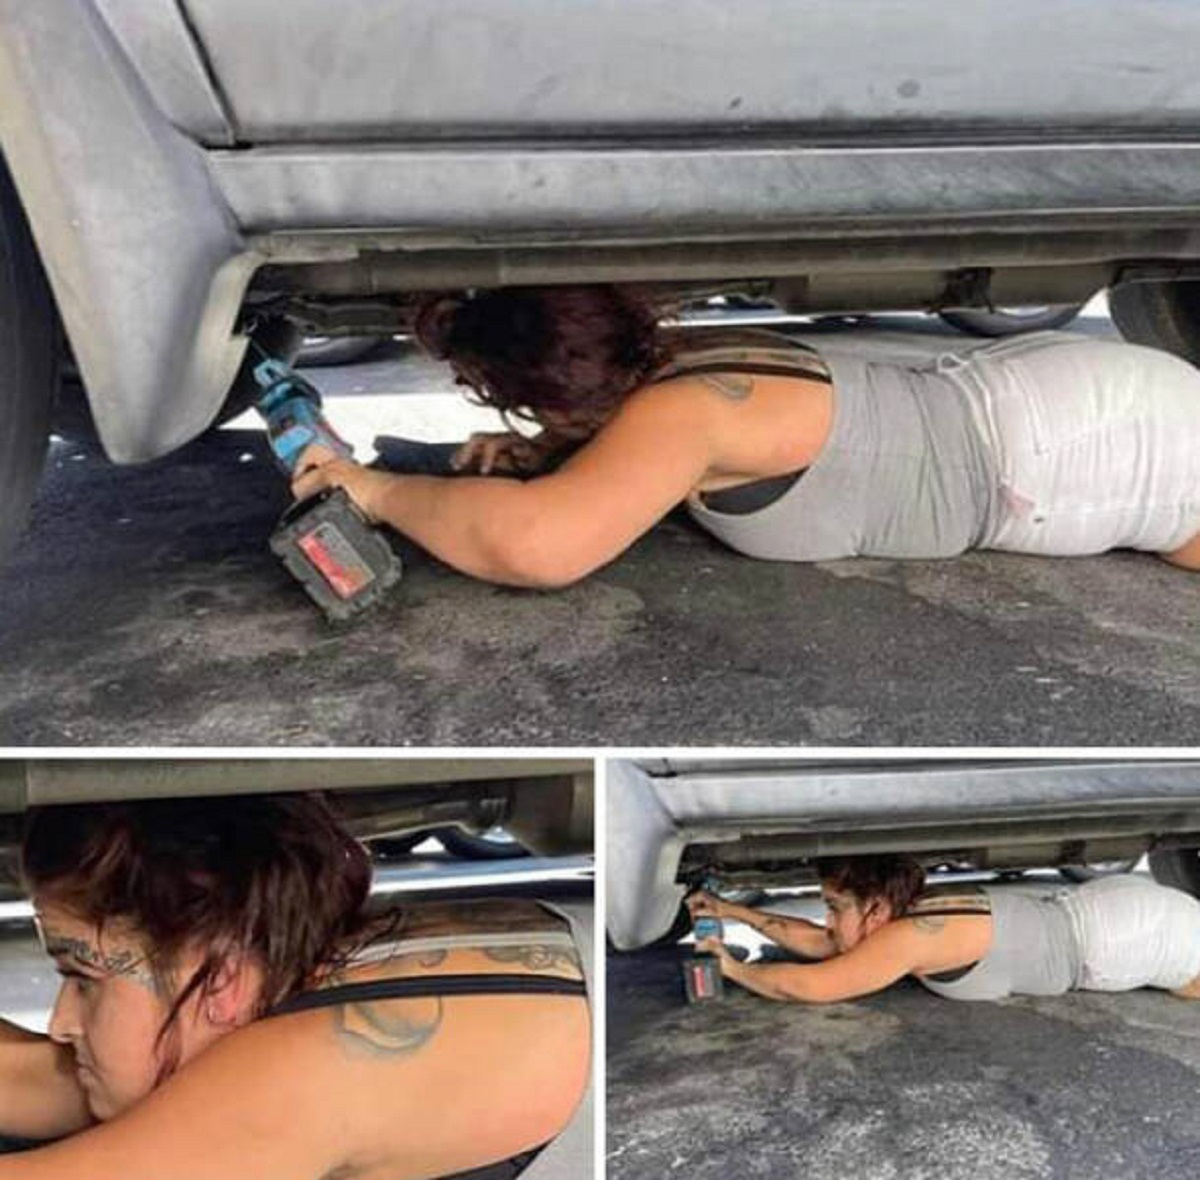 "Stealing Catalytic Converters In Broad Daylight"